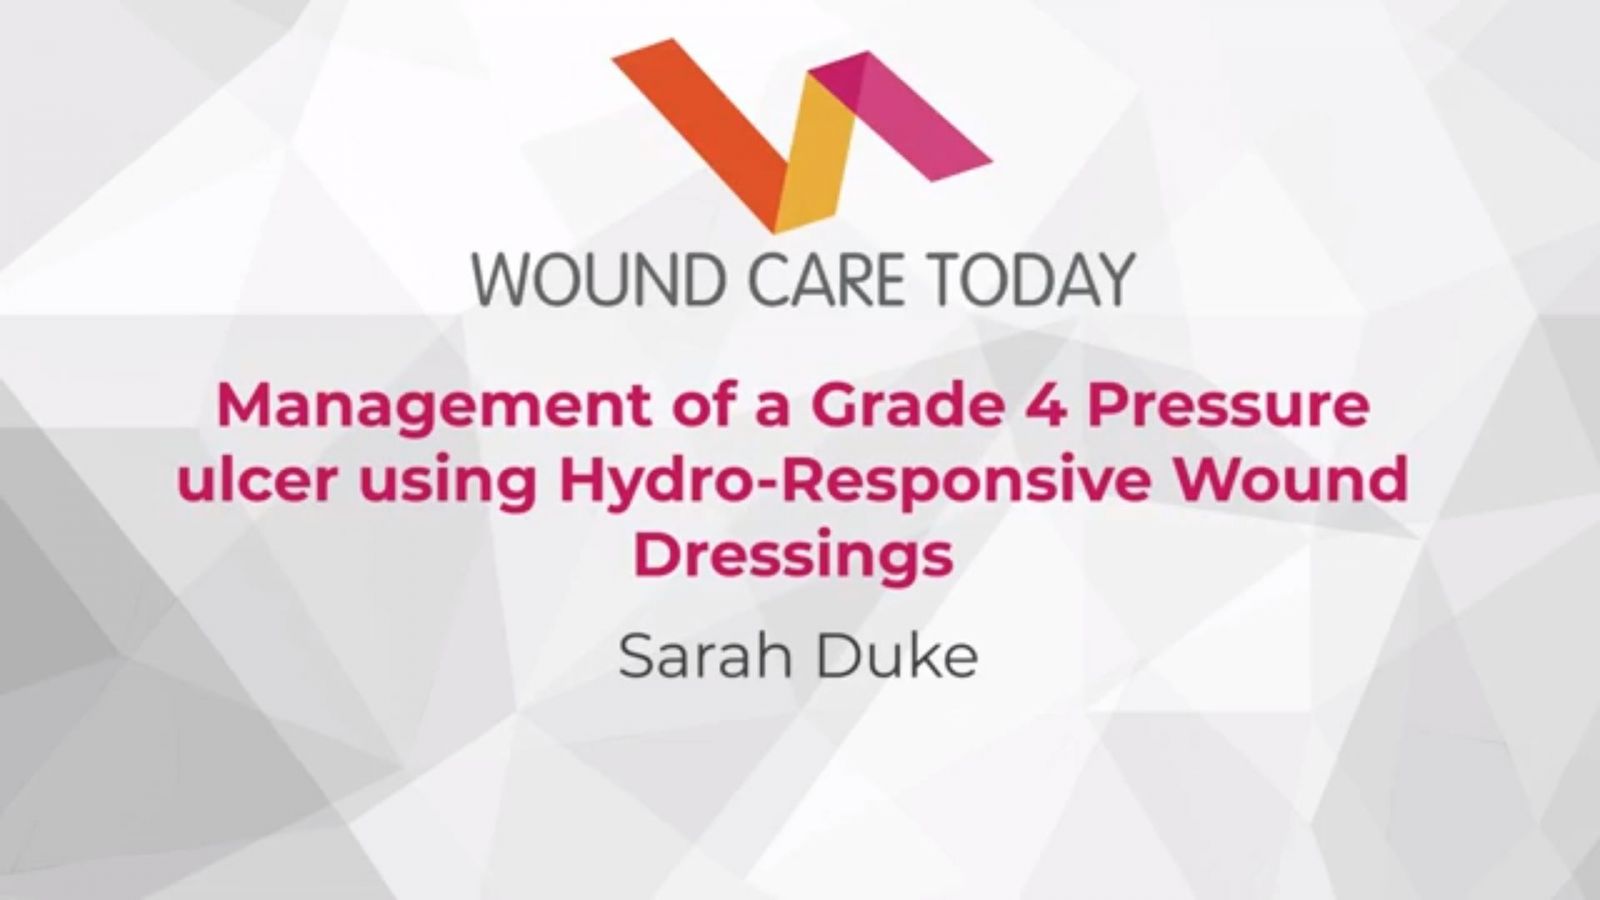 management-of-a-grade-4-pressure-ulcer-using-hydro-responsive-wound-dressings